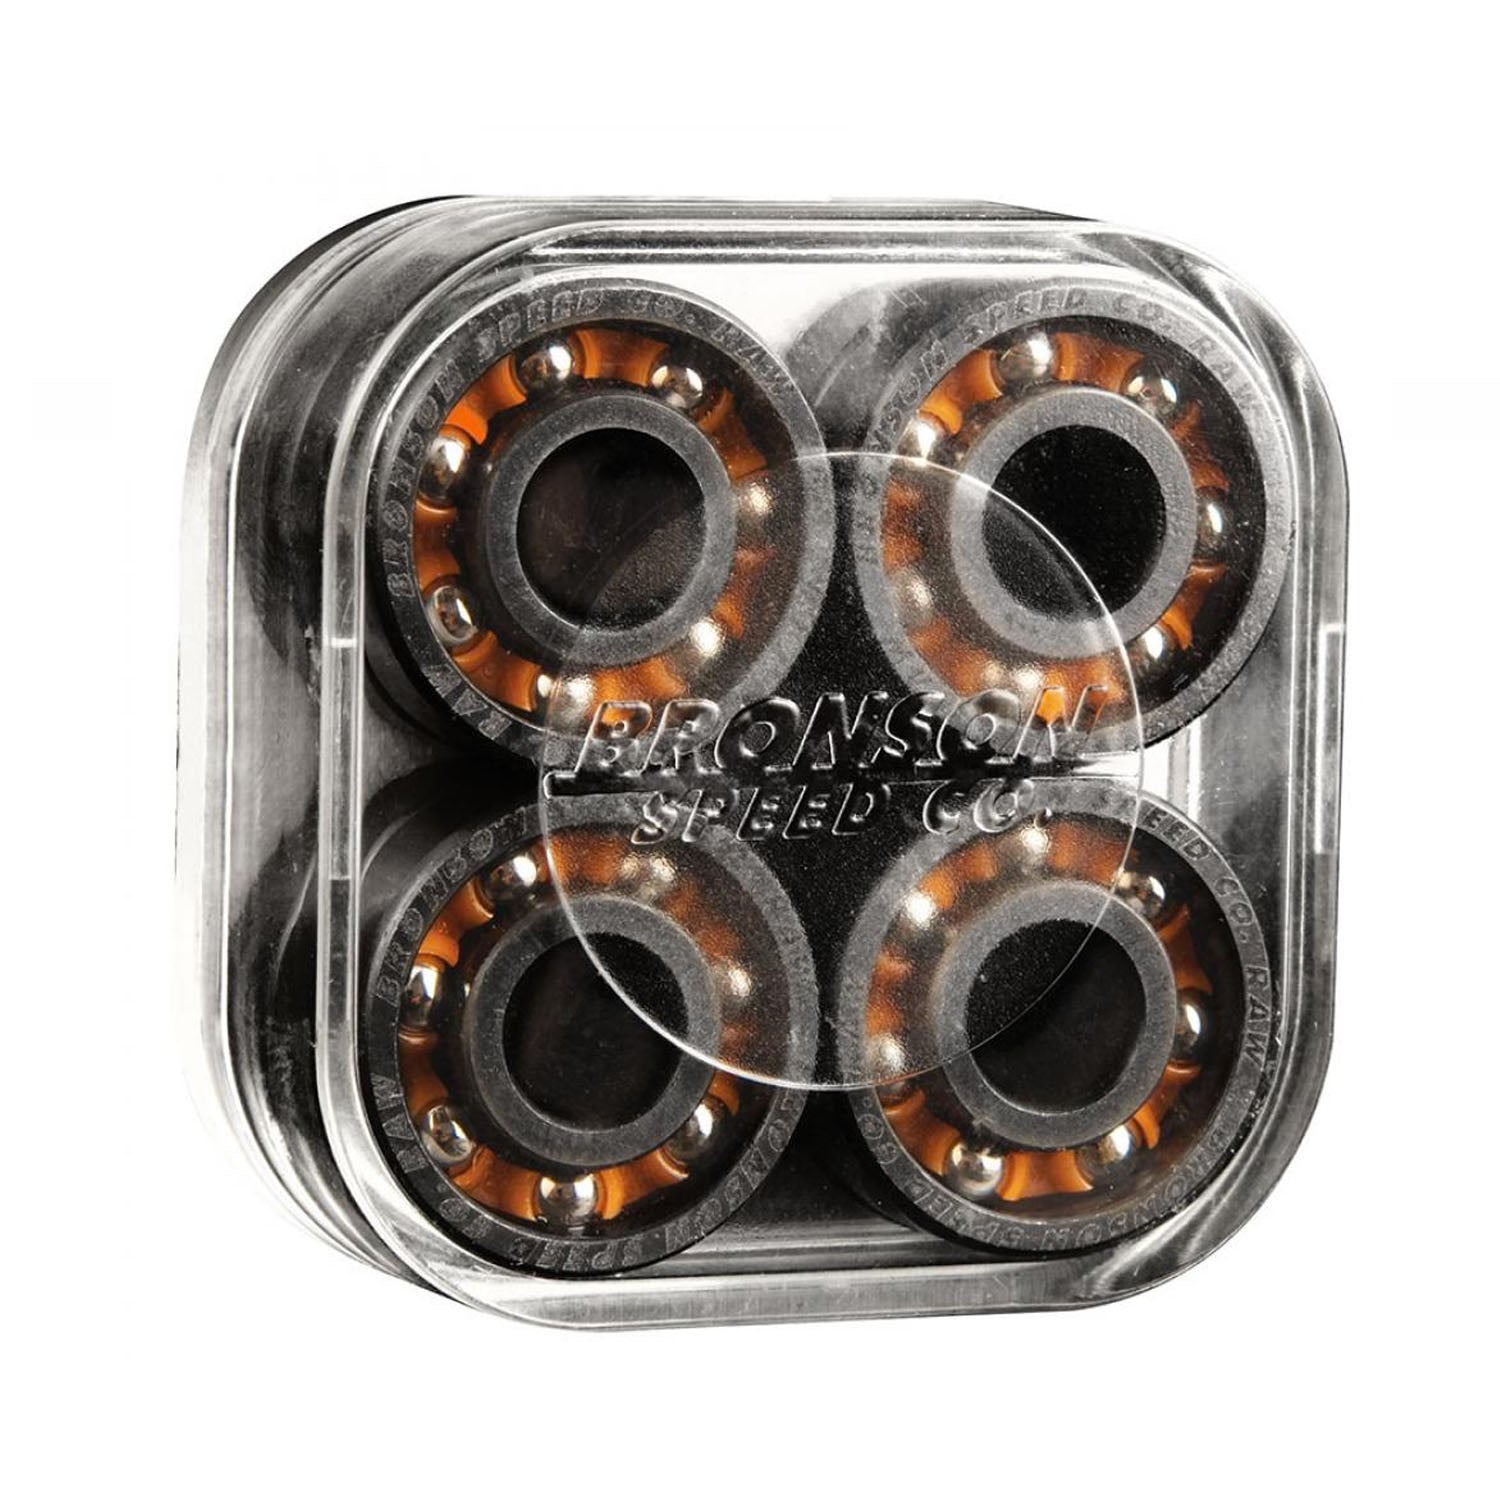 Bronson Speed Co. Bearings Raw (pack of 8) - Prime Delux Store